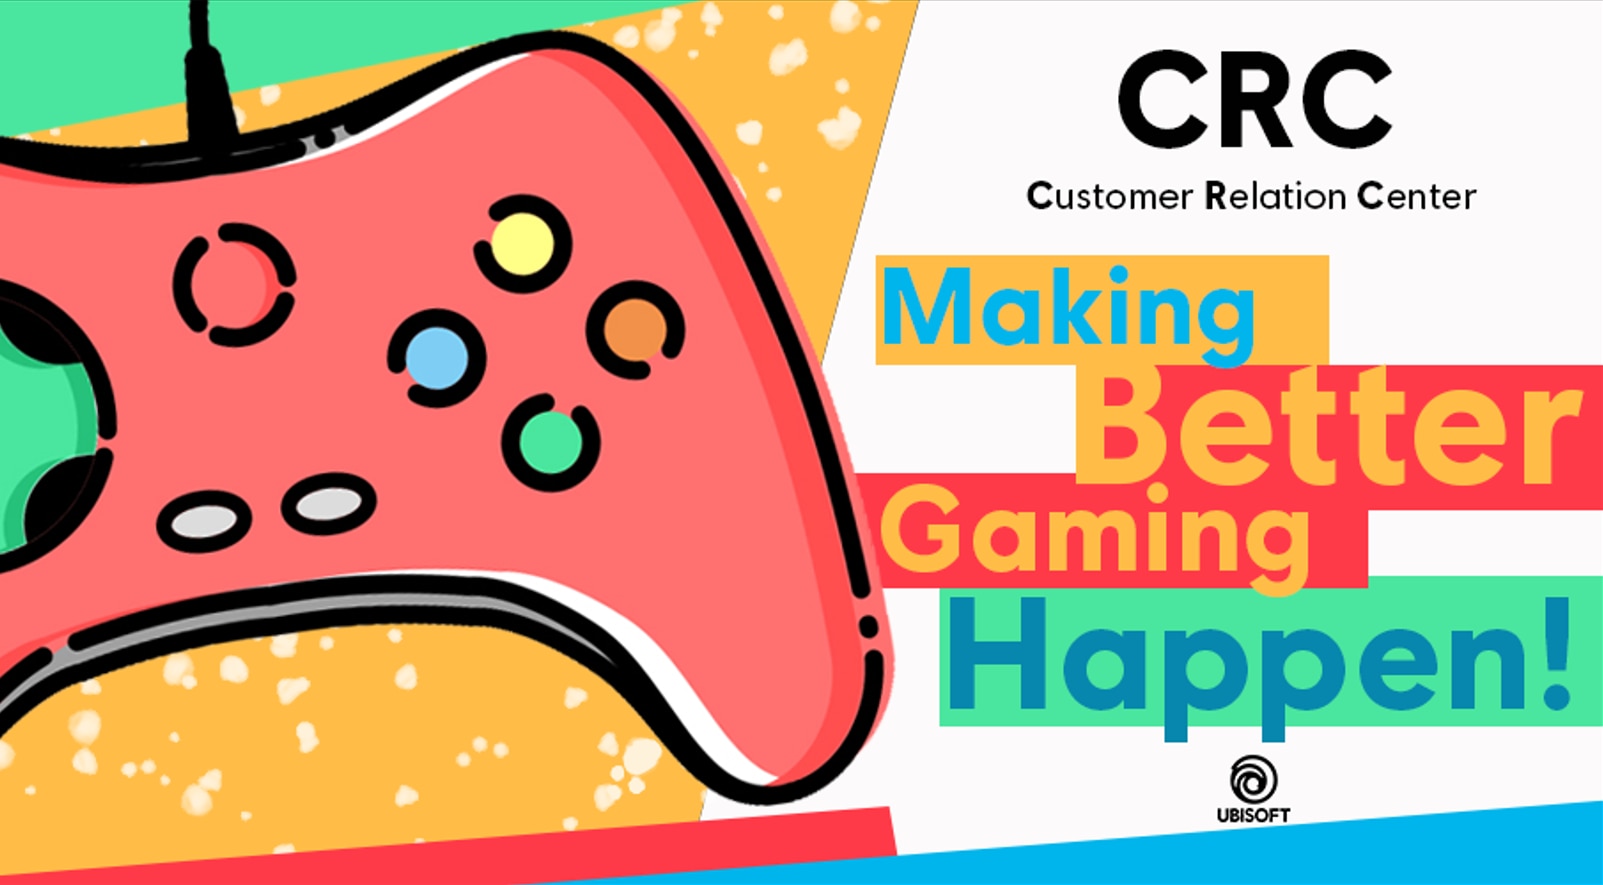 Making Better Gaming Happen: Discover the EMEA CRC